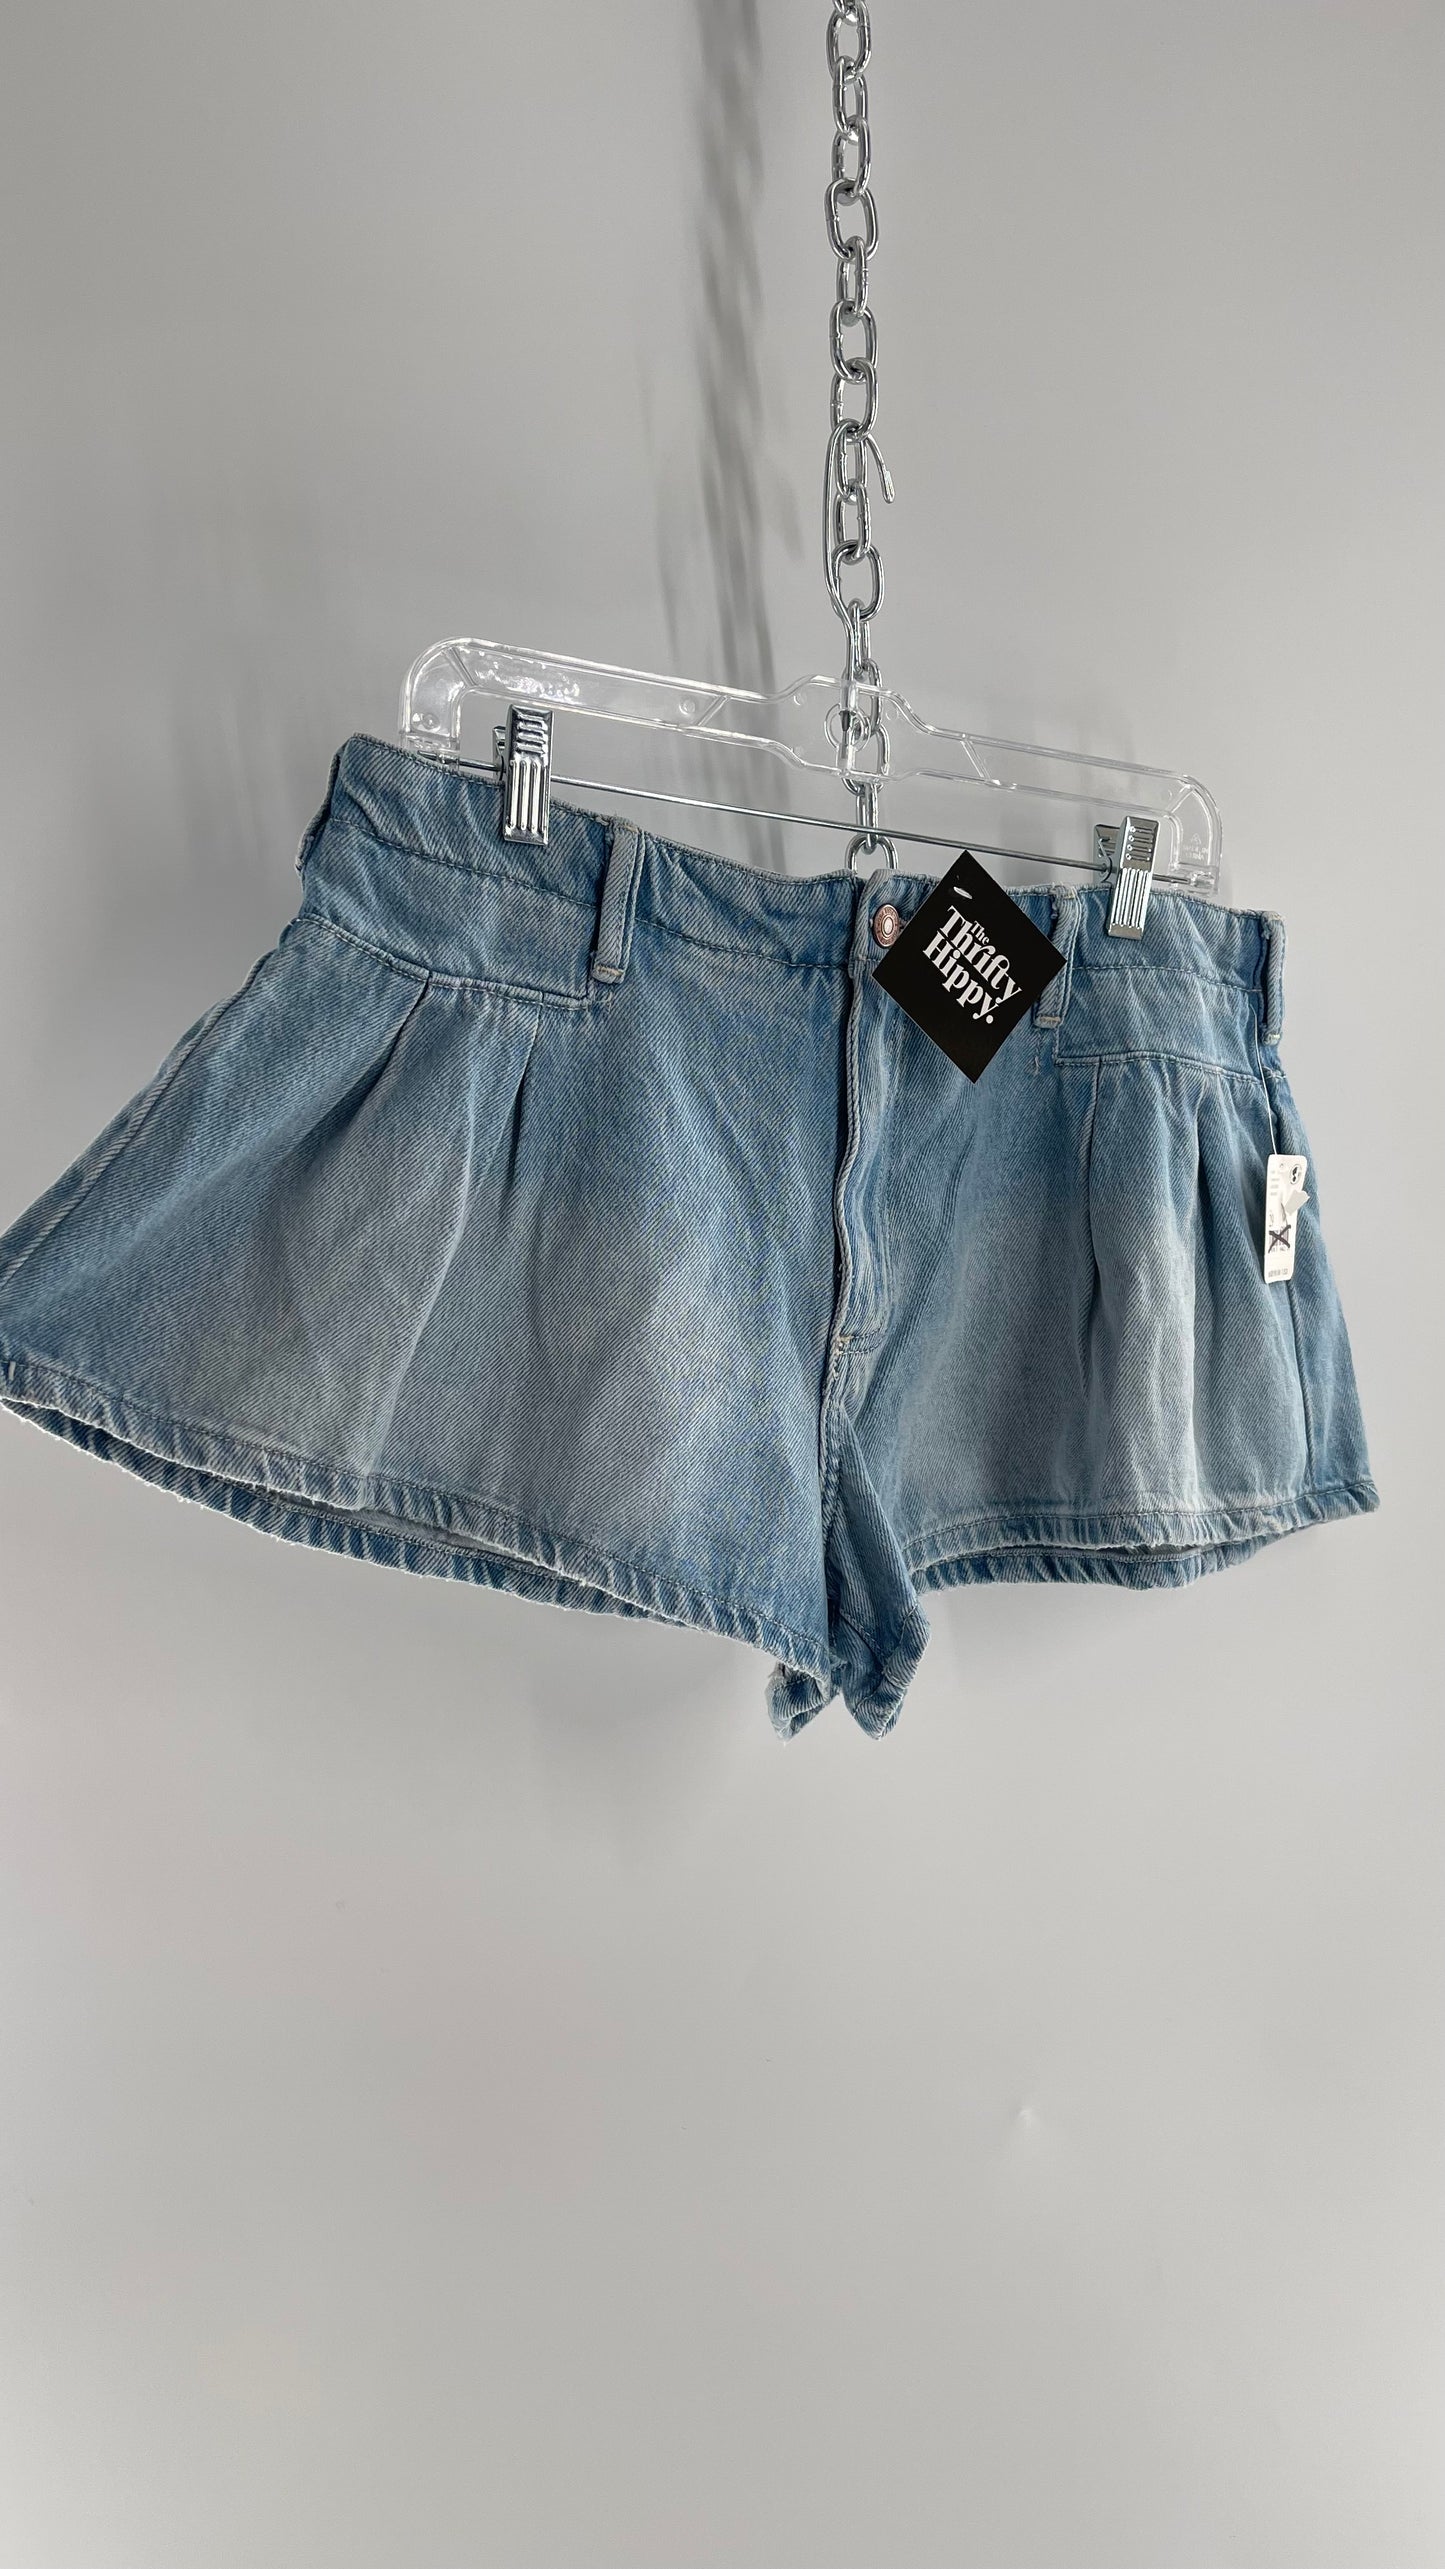 Free People Blue Bell Low Rise Pleated Short with Tags Attached (29)